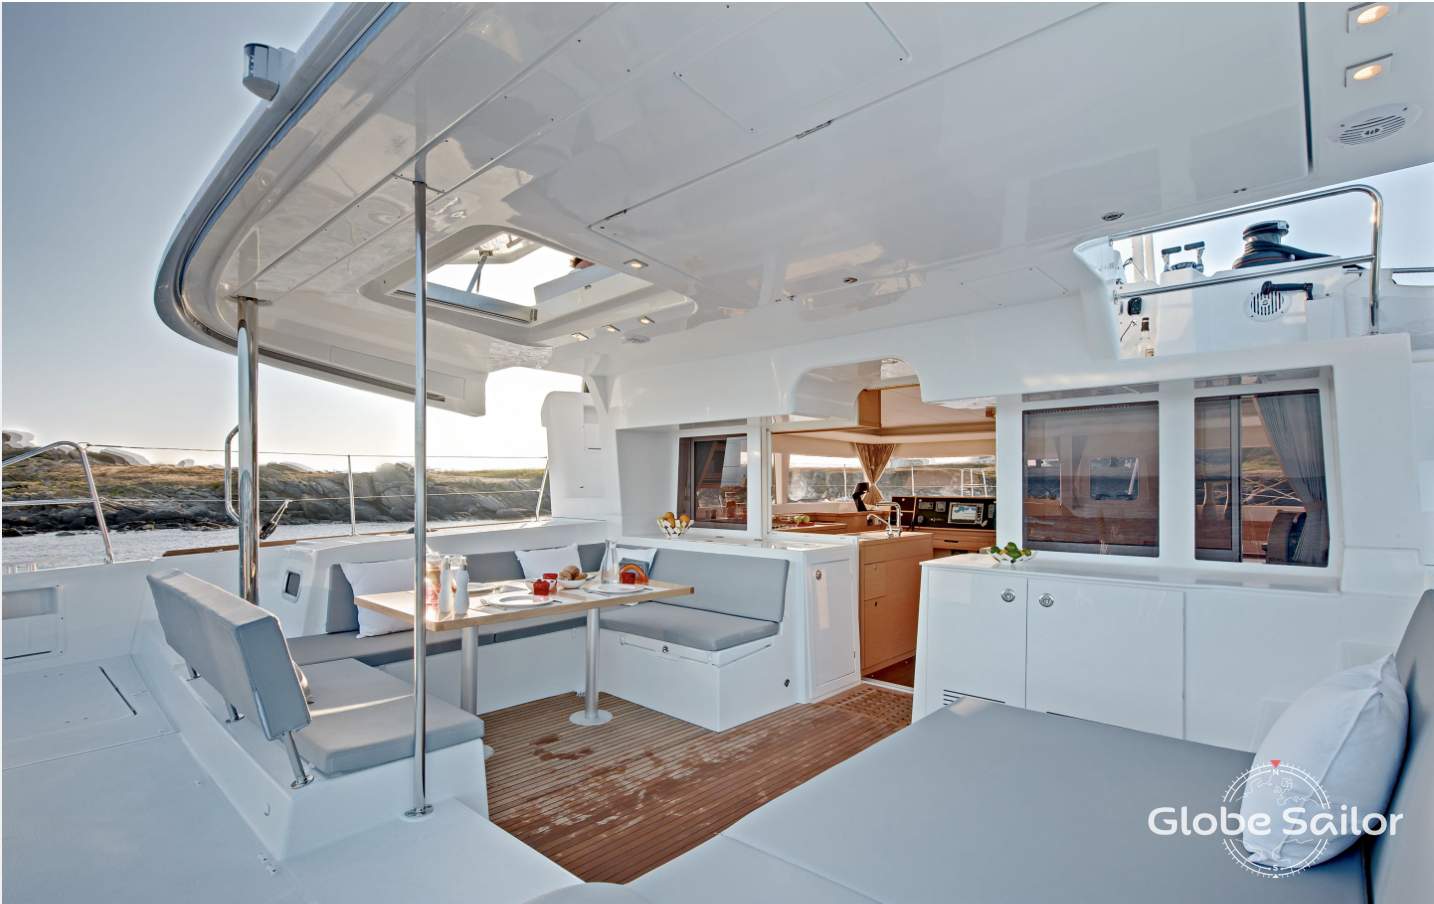 On the Lagoon 450, each space is designed for your comfort